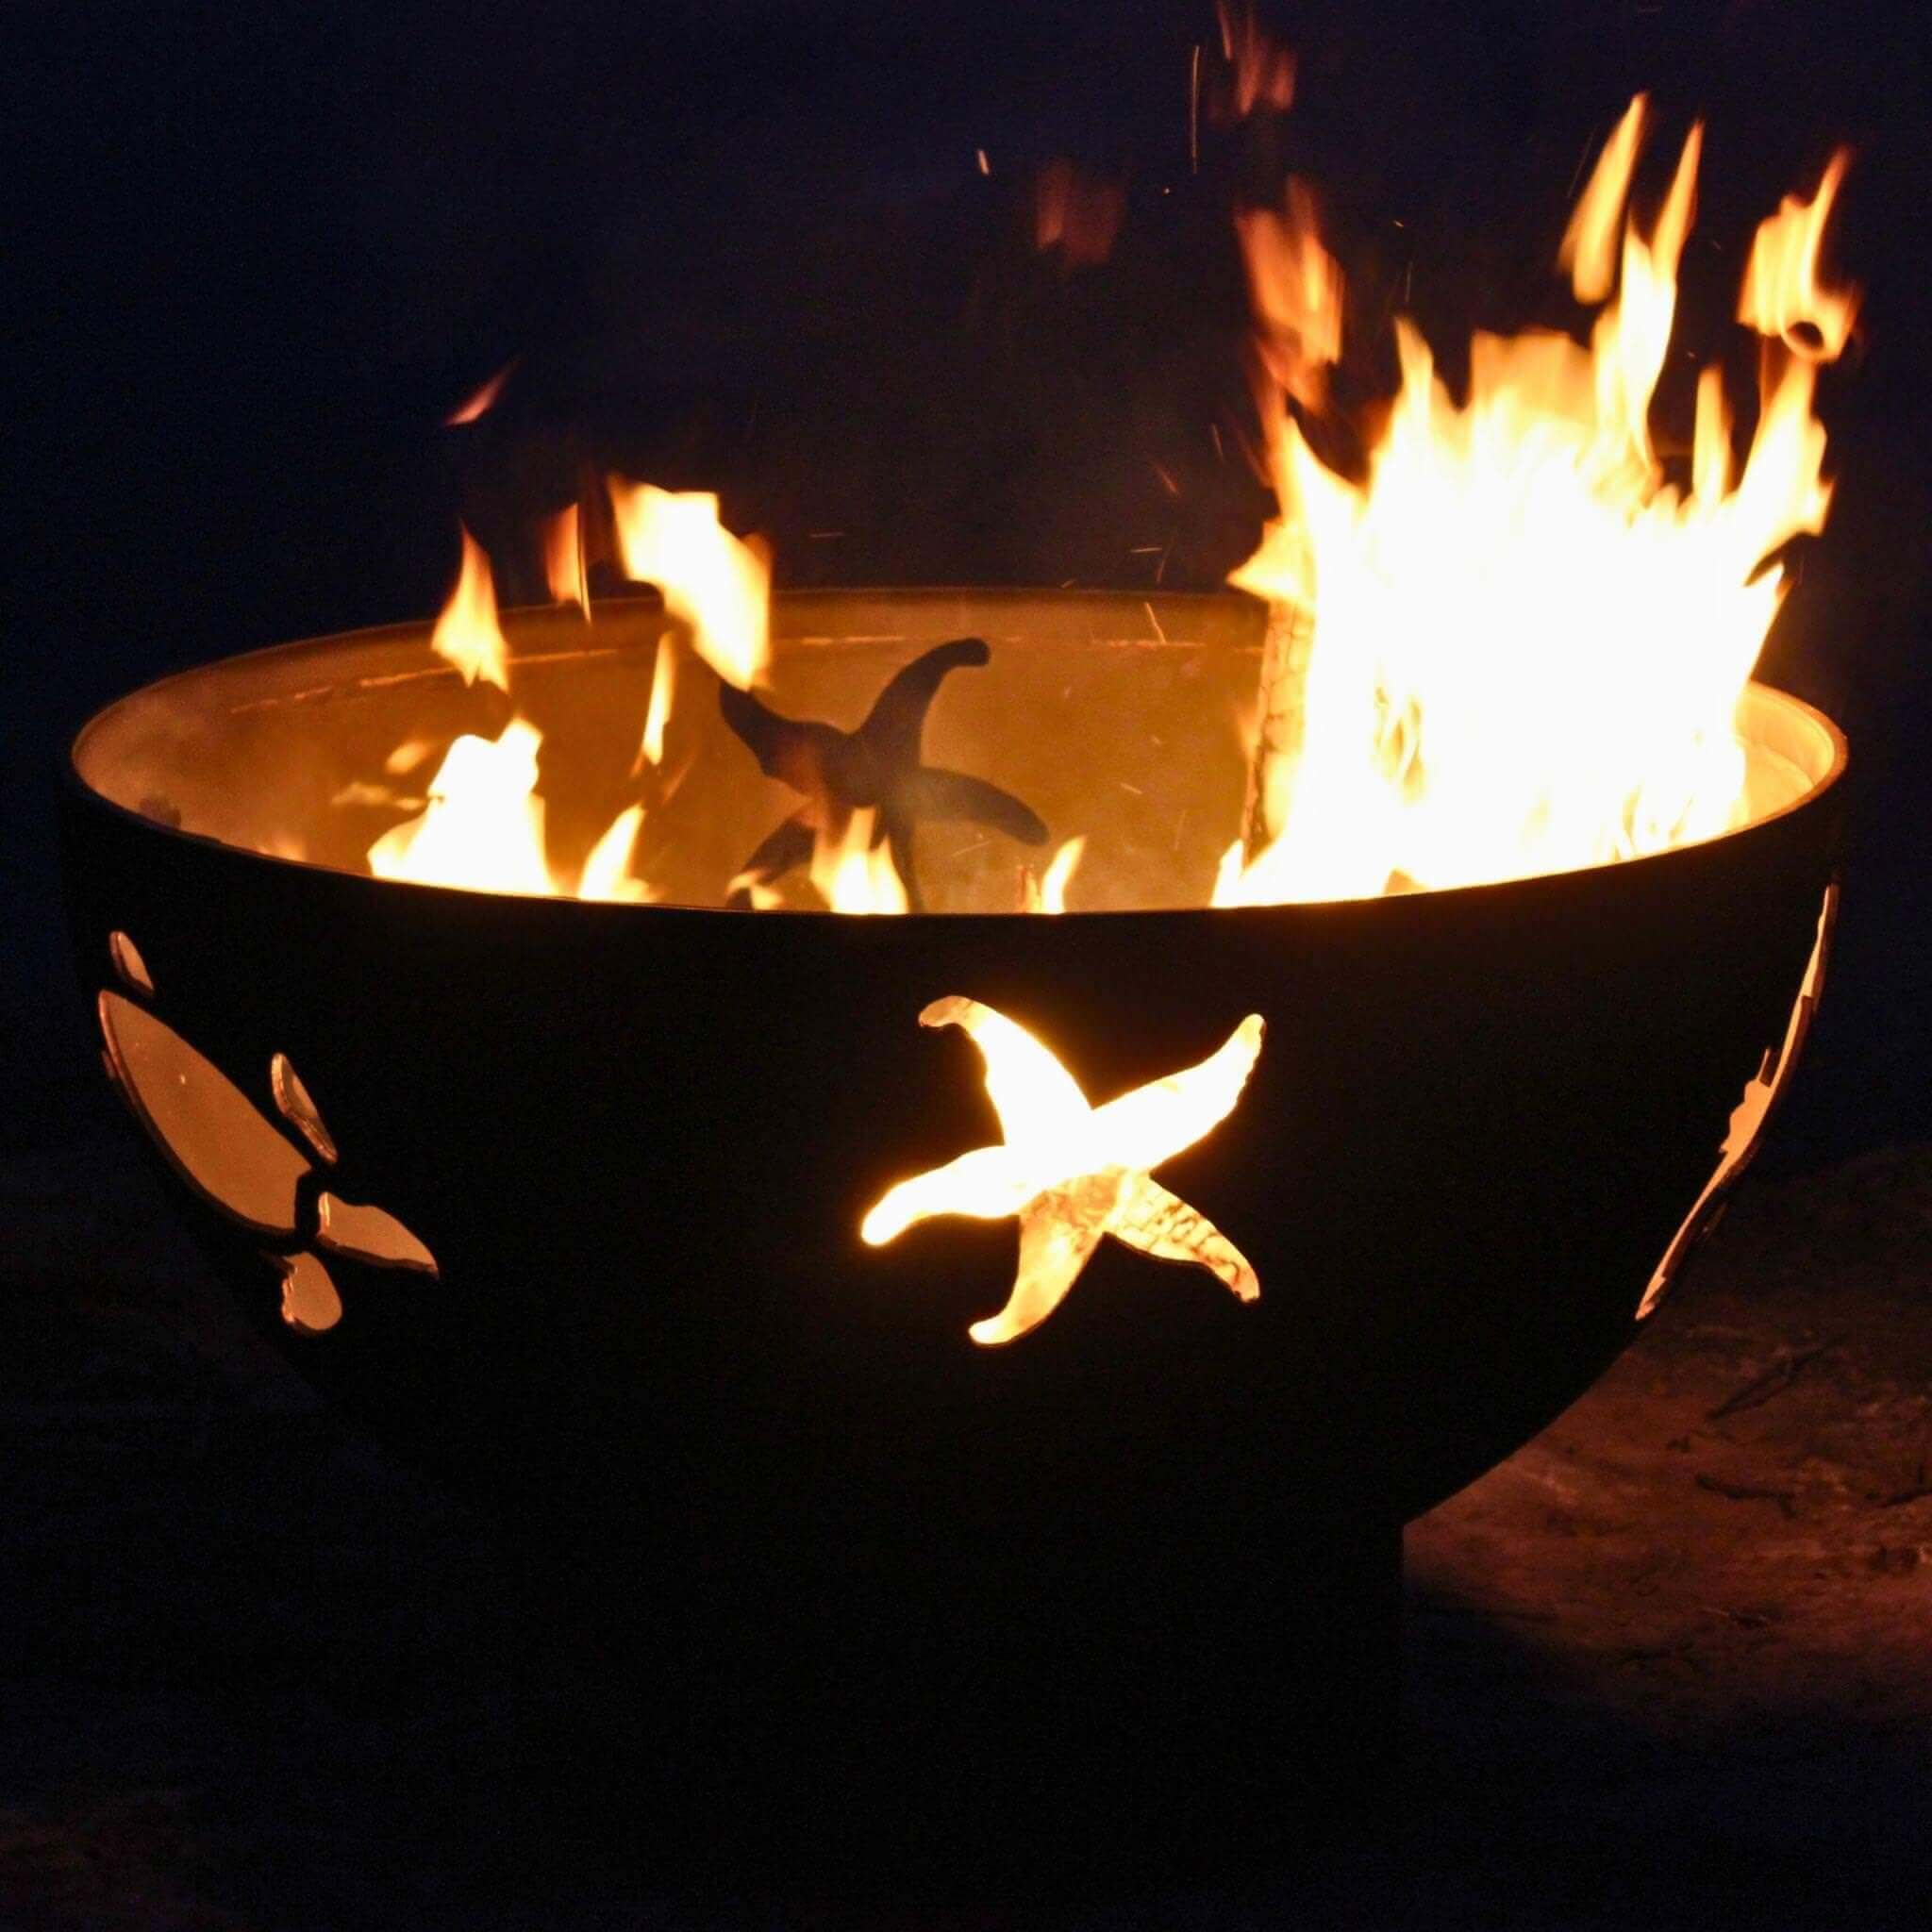 "Sea Creatures" Wood Burning Fire Pit in Steel - Fire Pit Art